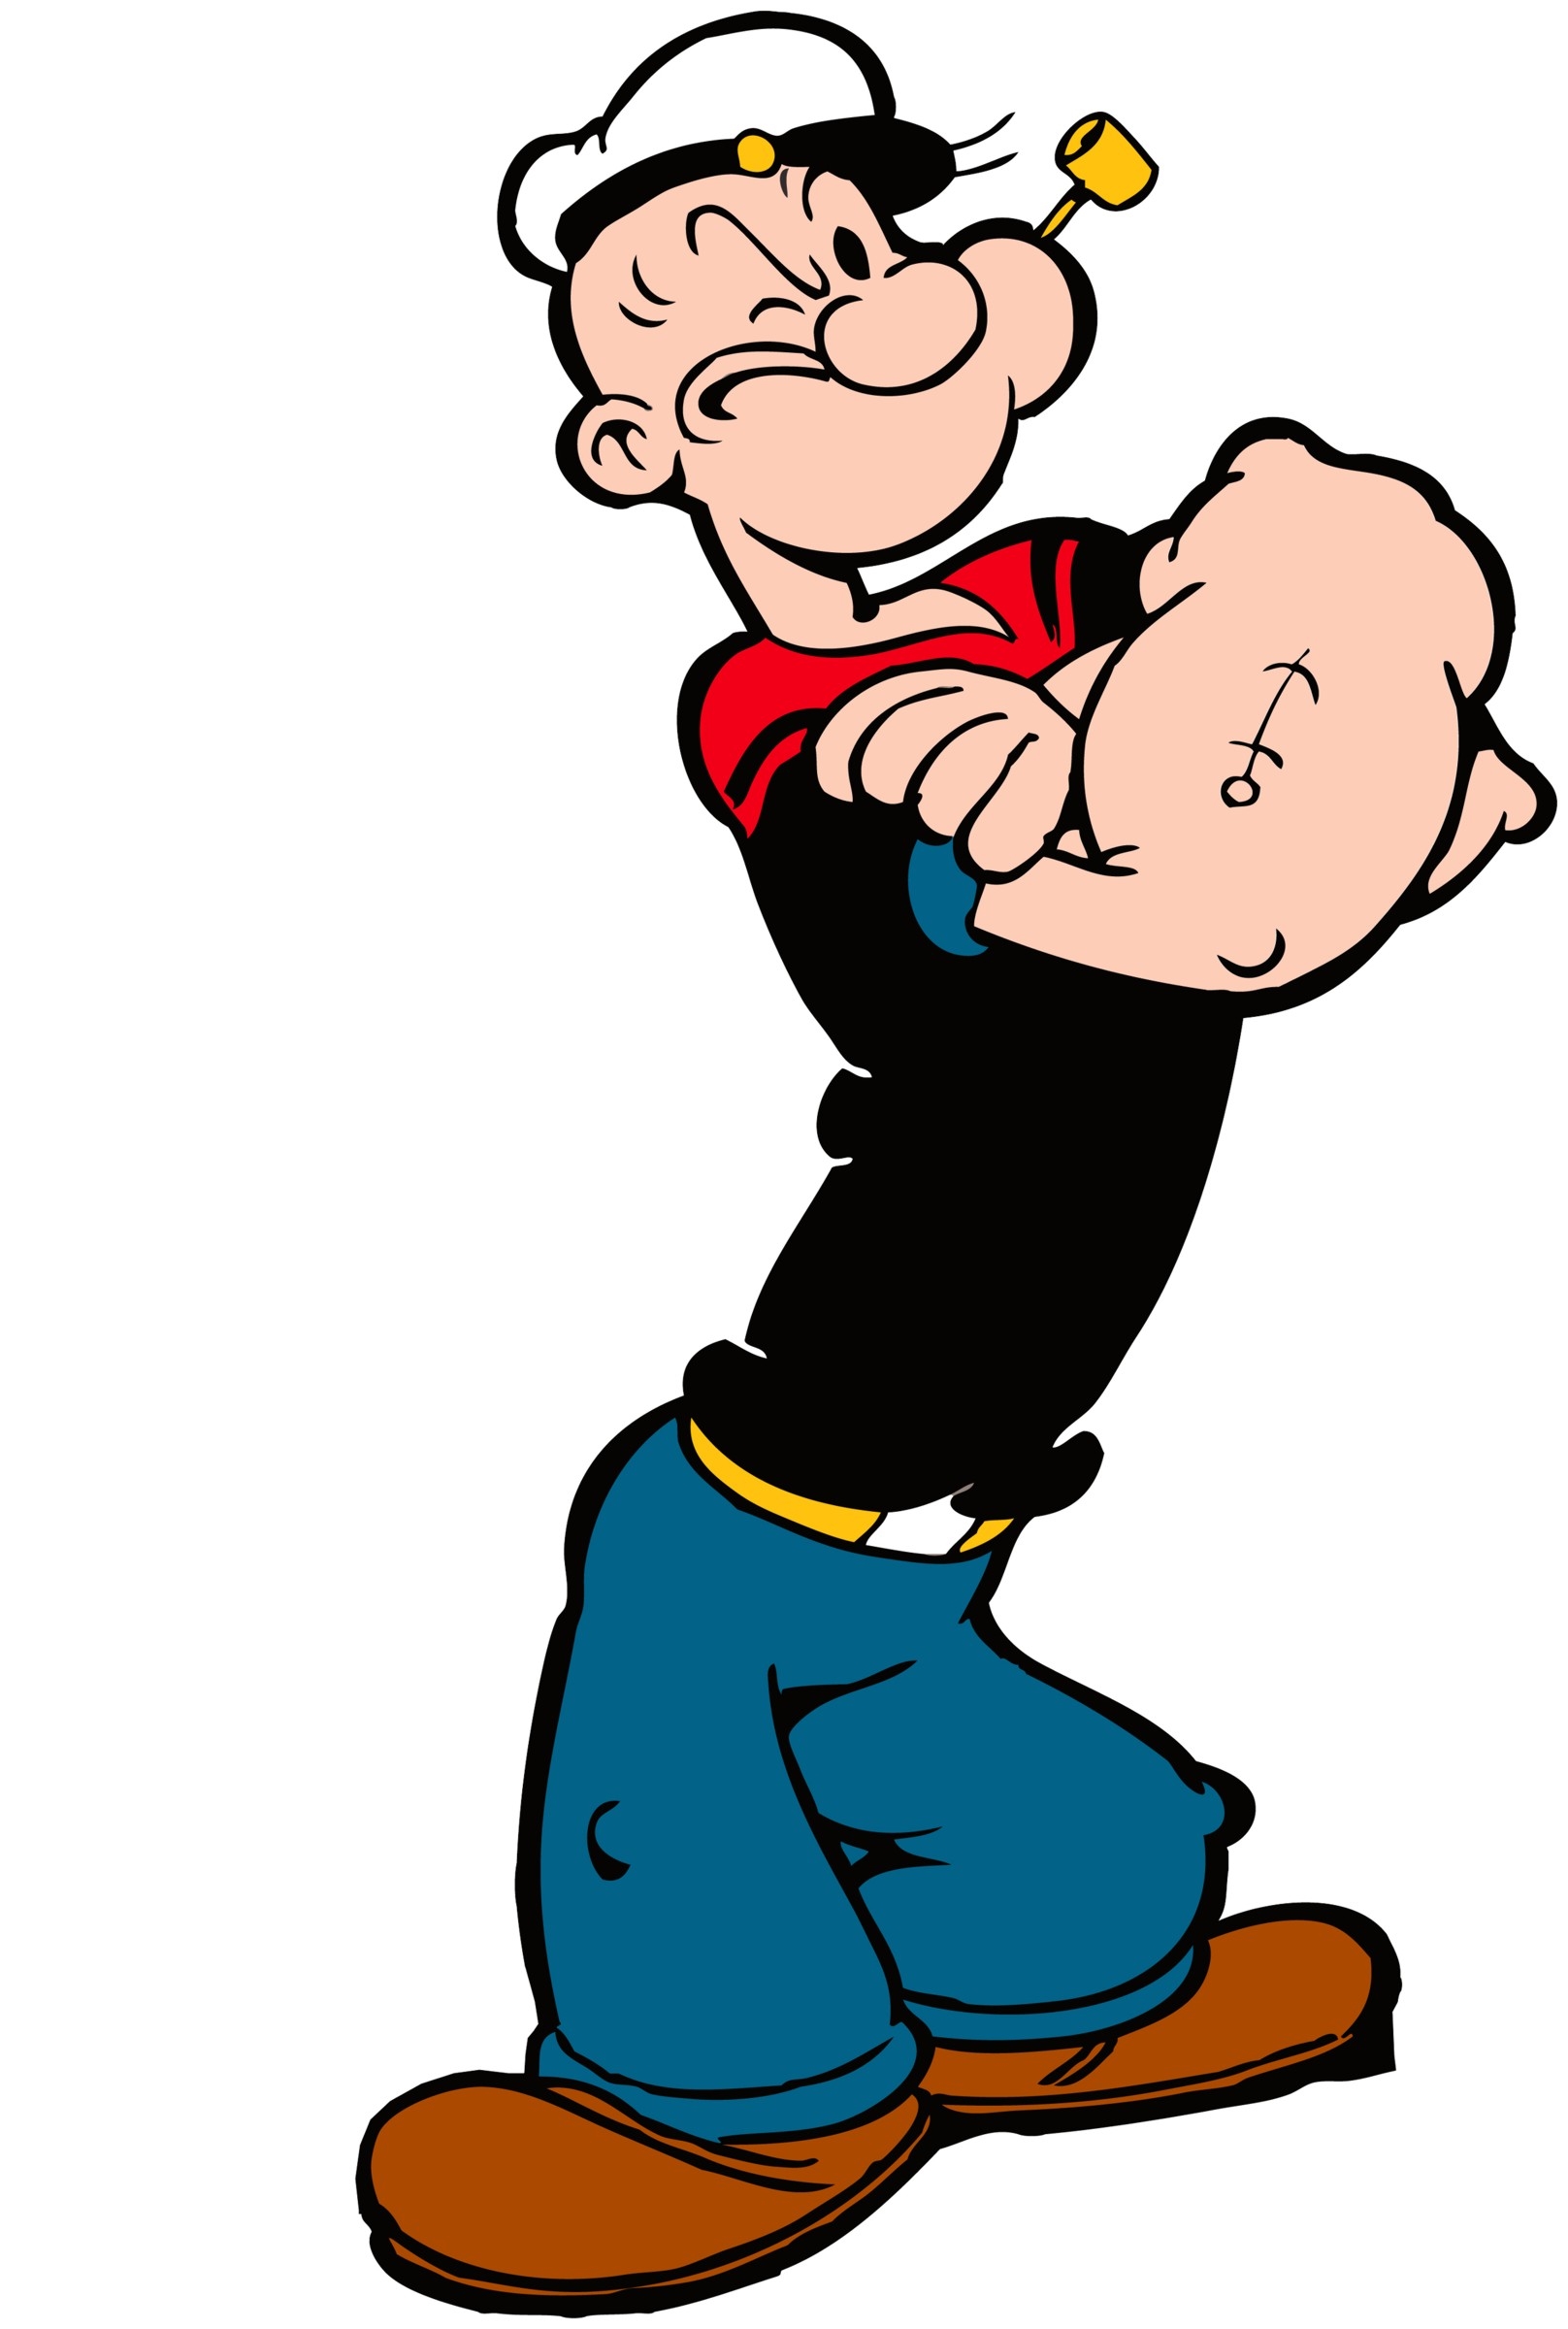 Hd Widescreen Popeye Hd Pictures, - Popeye The Sailor Man , HD Wallpaper & Backgrounds